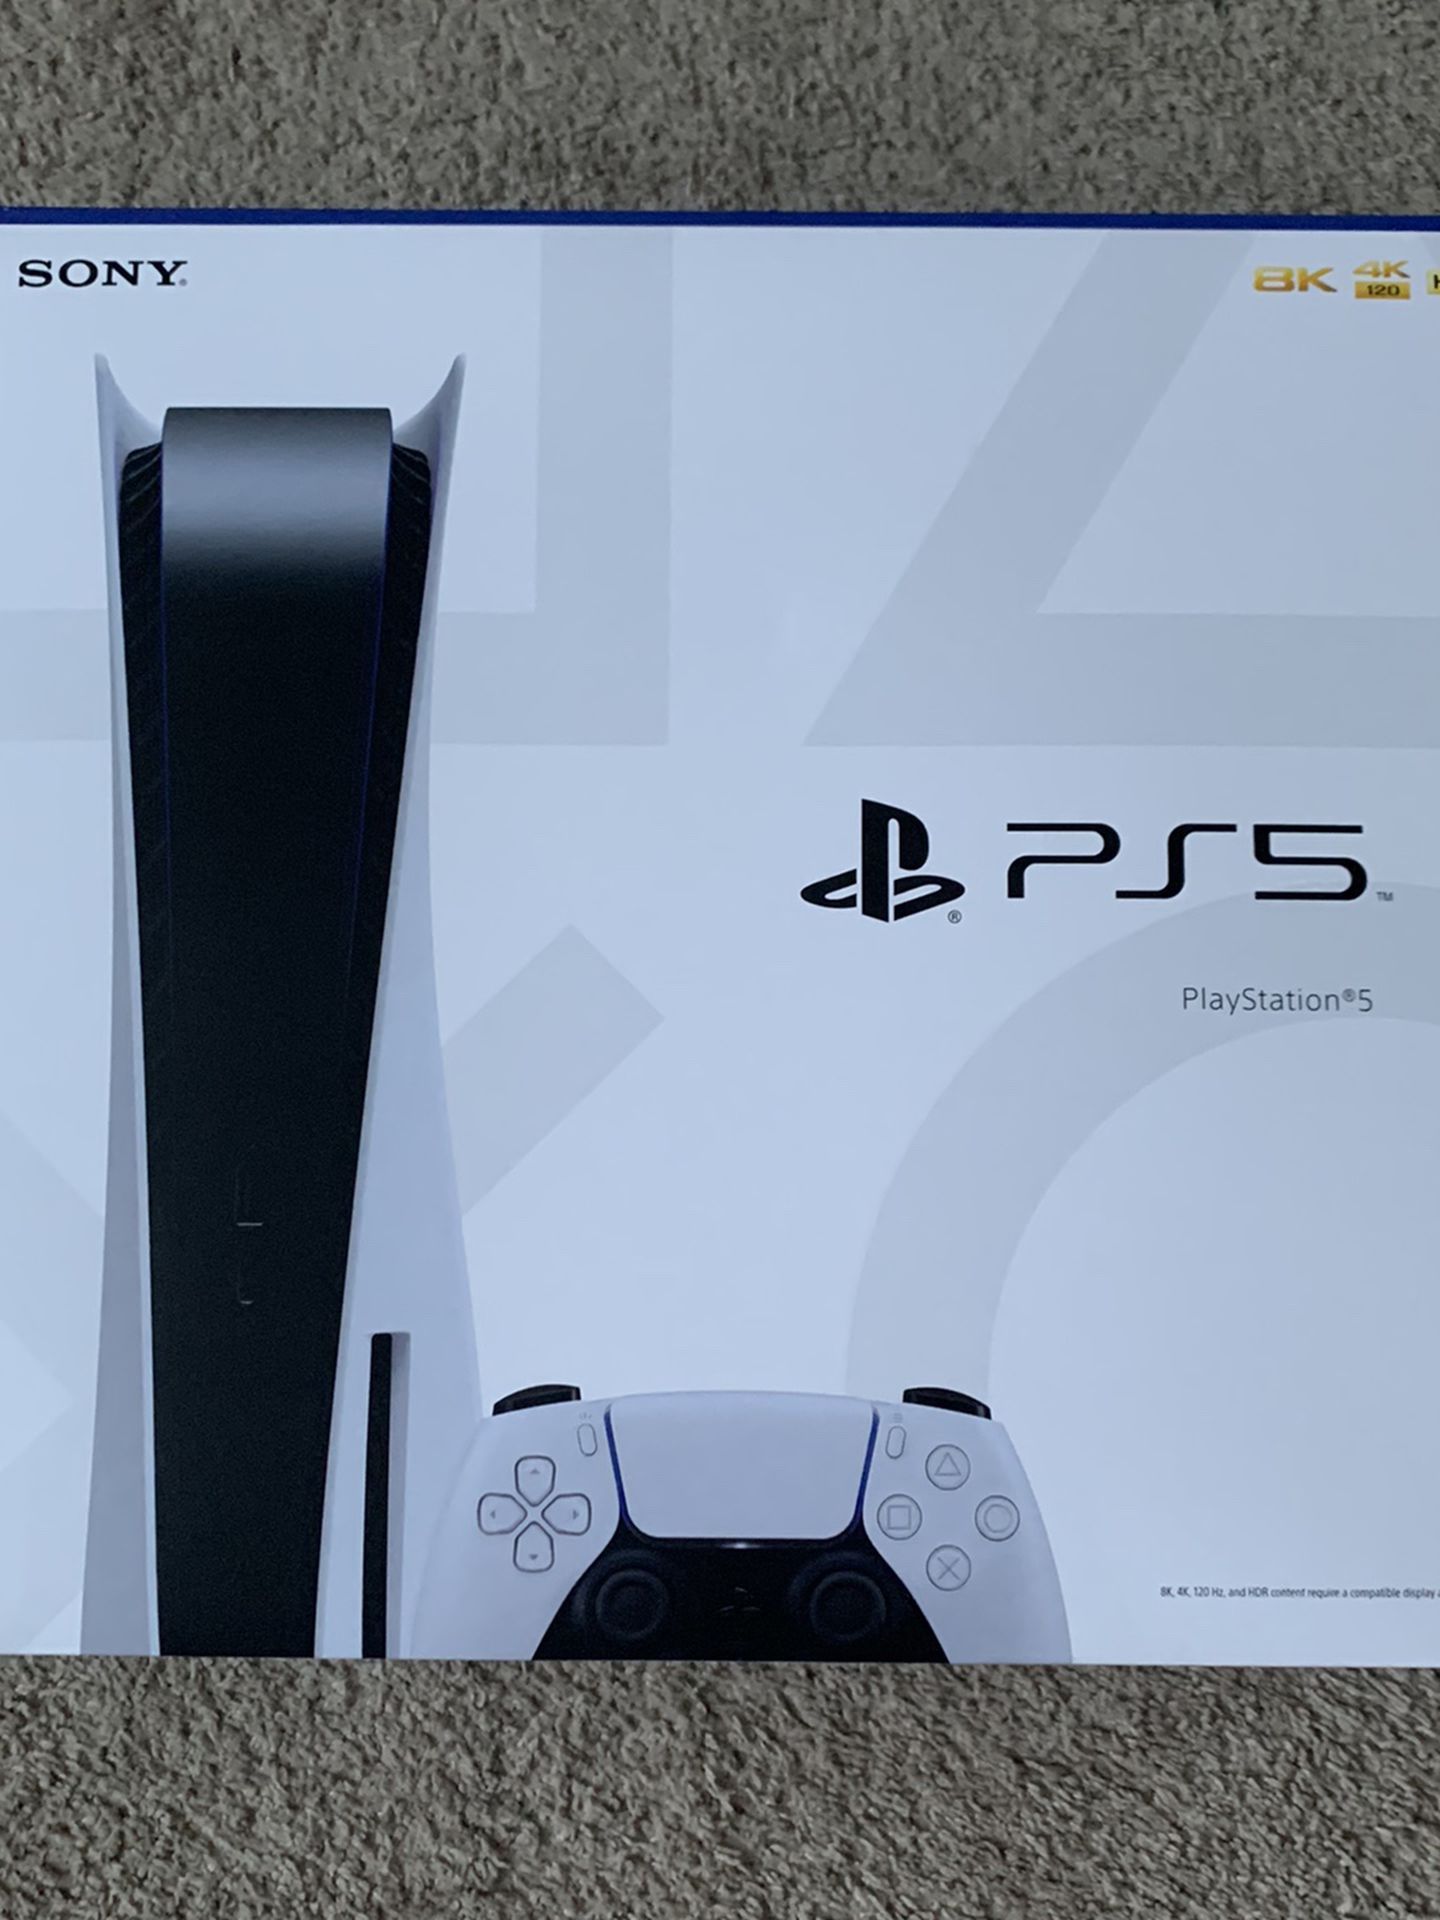 Sony Playstaion Ps5 DISK Version in Hand